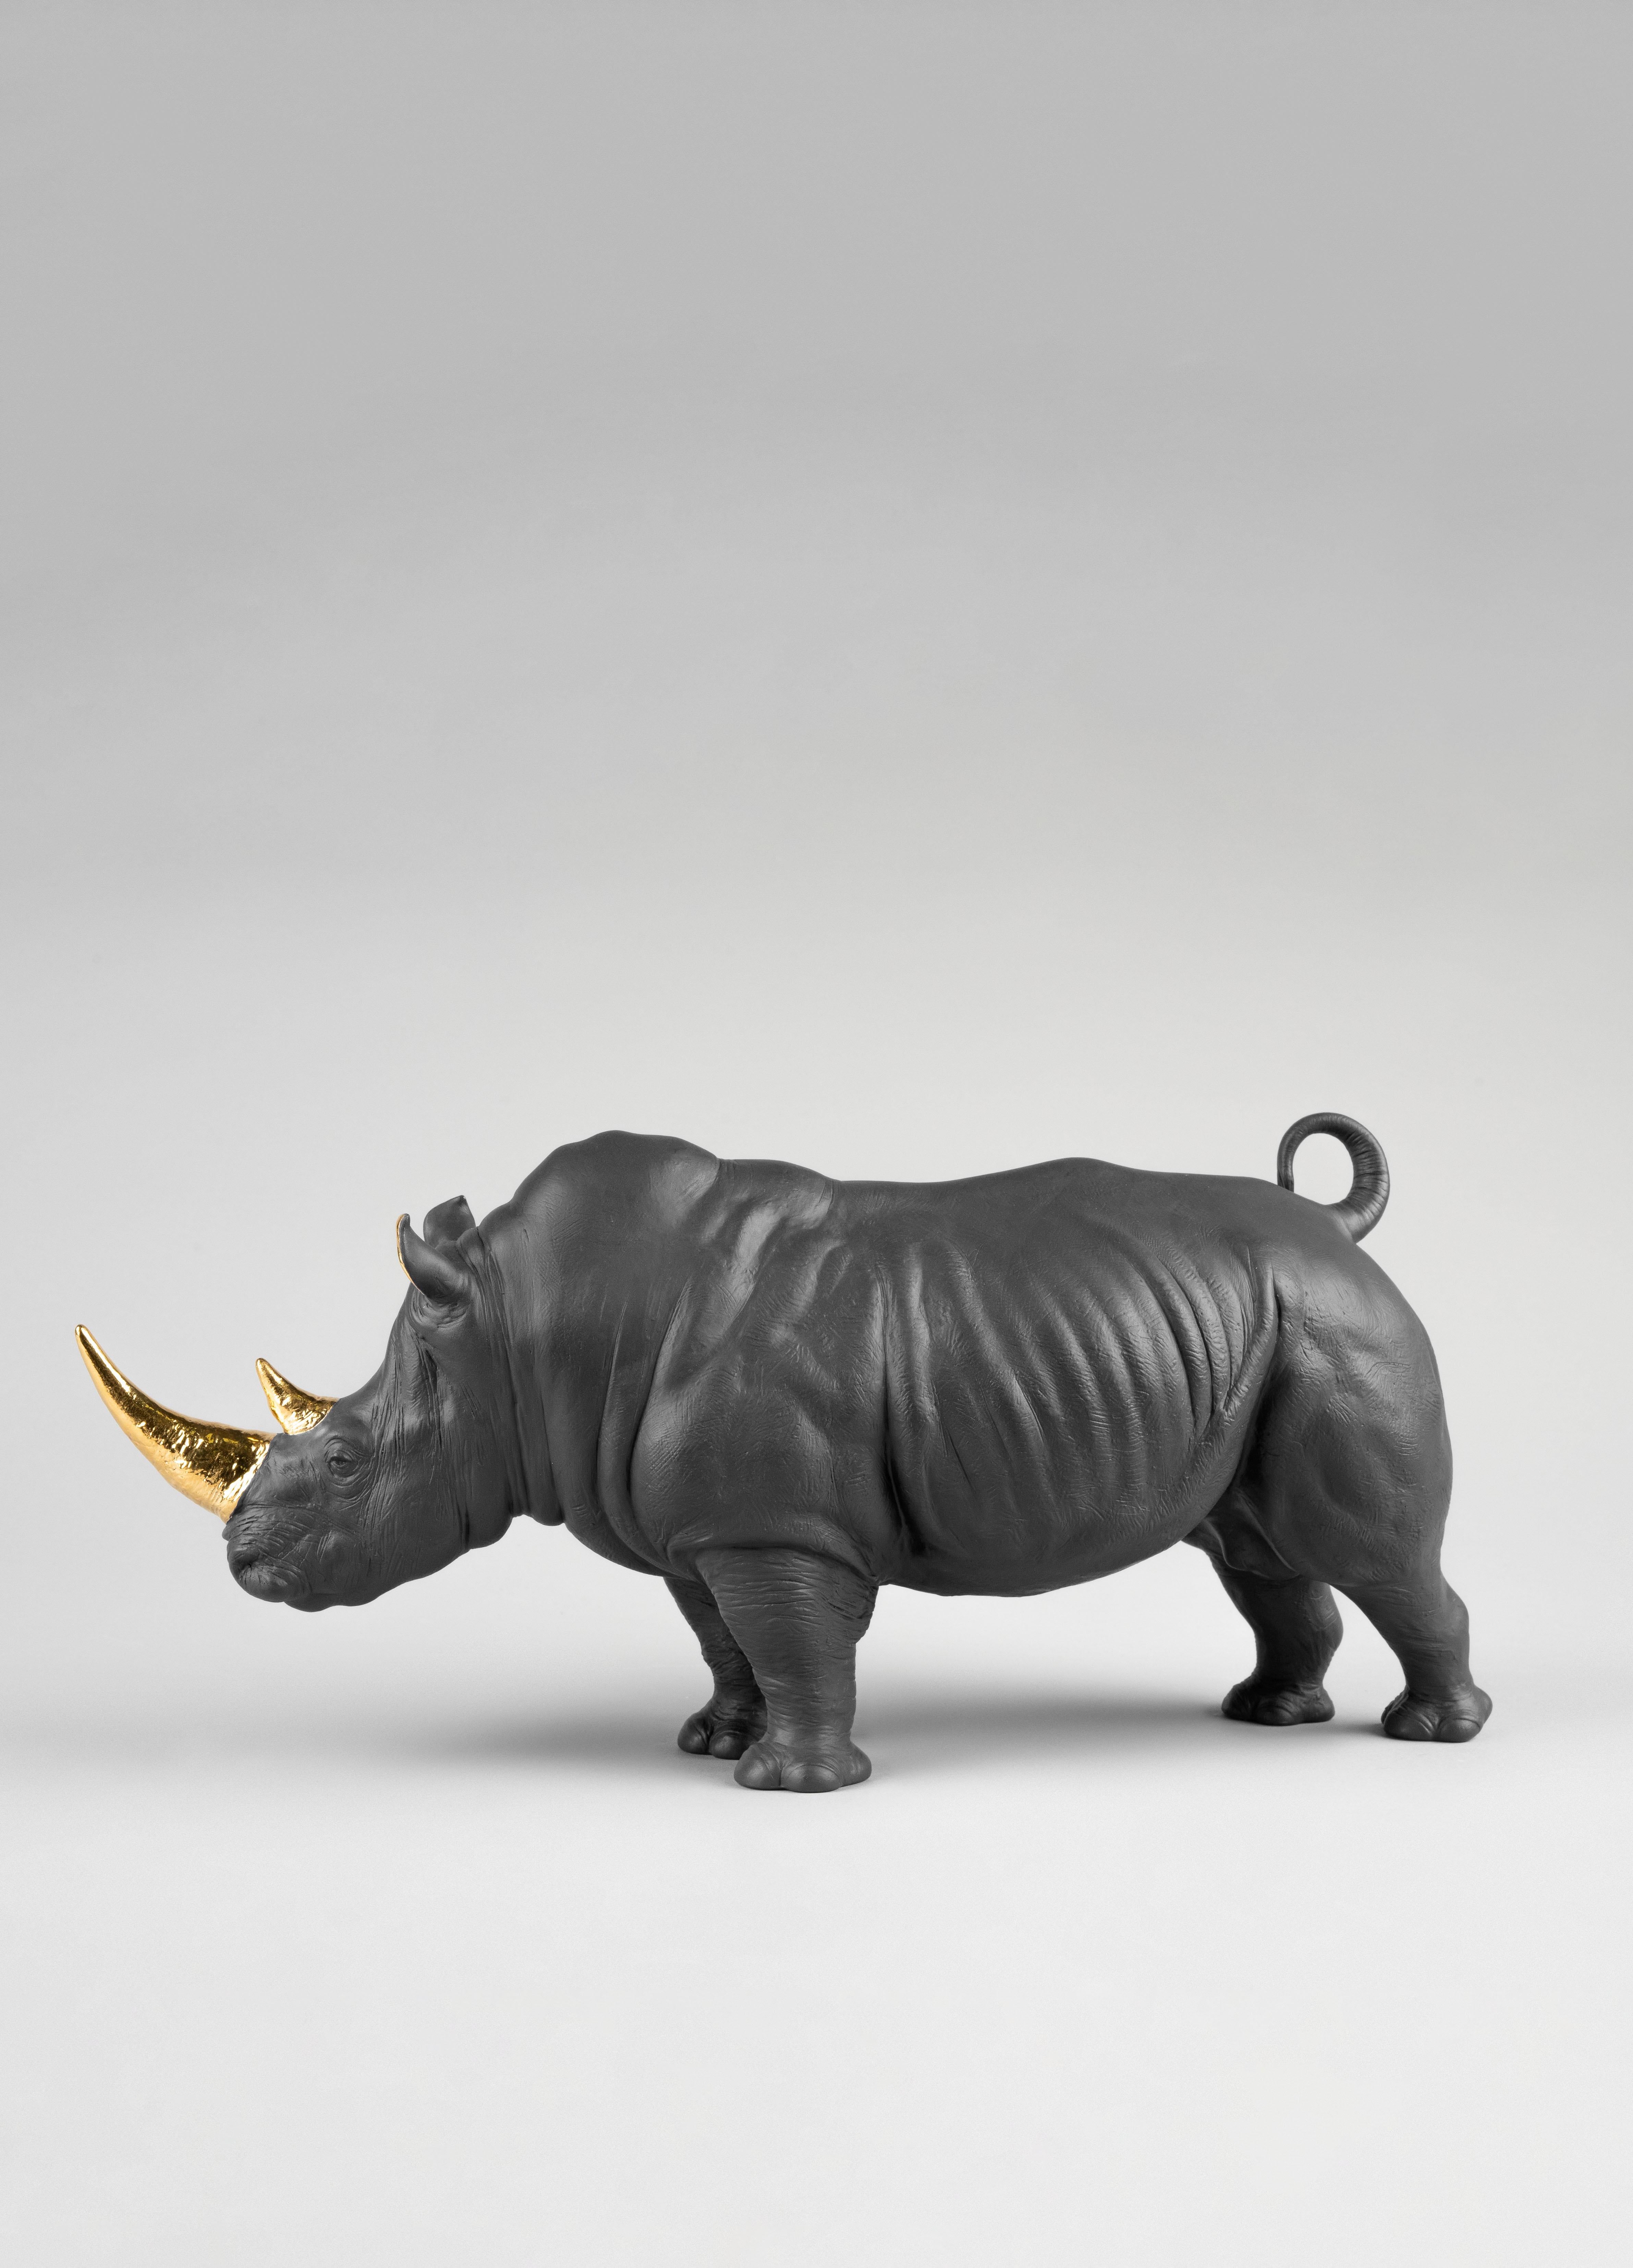 Porcelain sculpture of an African rhino with an innovative decoration. This porcelain creation portrays the African rhinoceros, one of the most magnificent animals from the savannah. Depicted in great detail, this splendid animal is now joining the